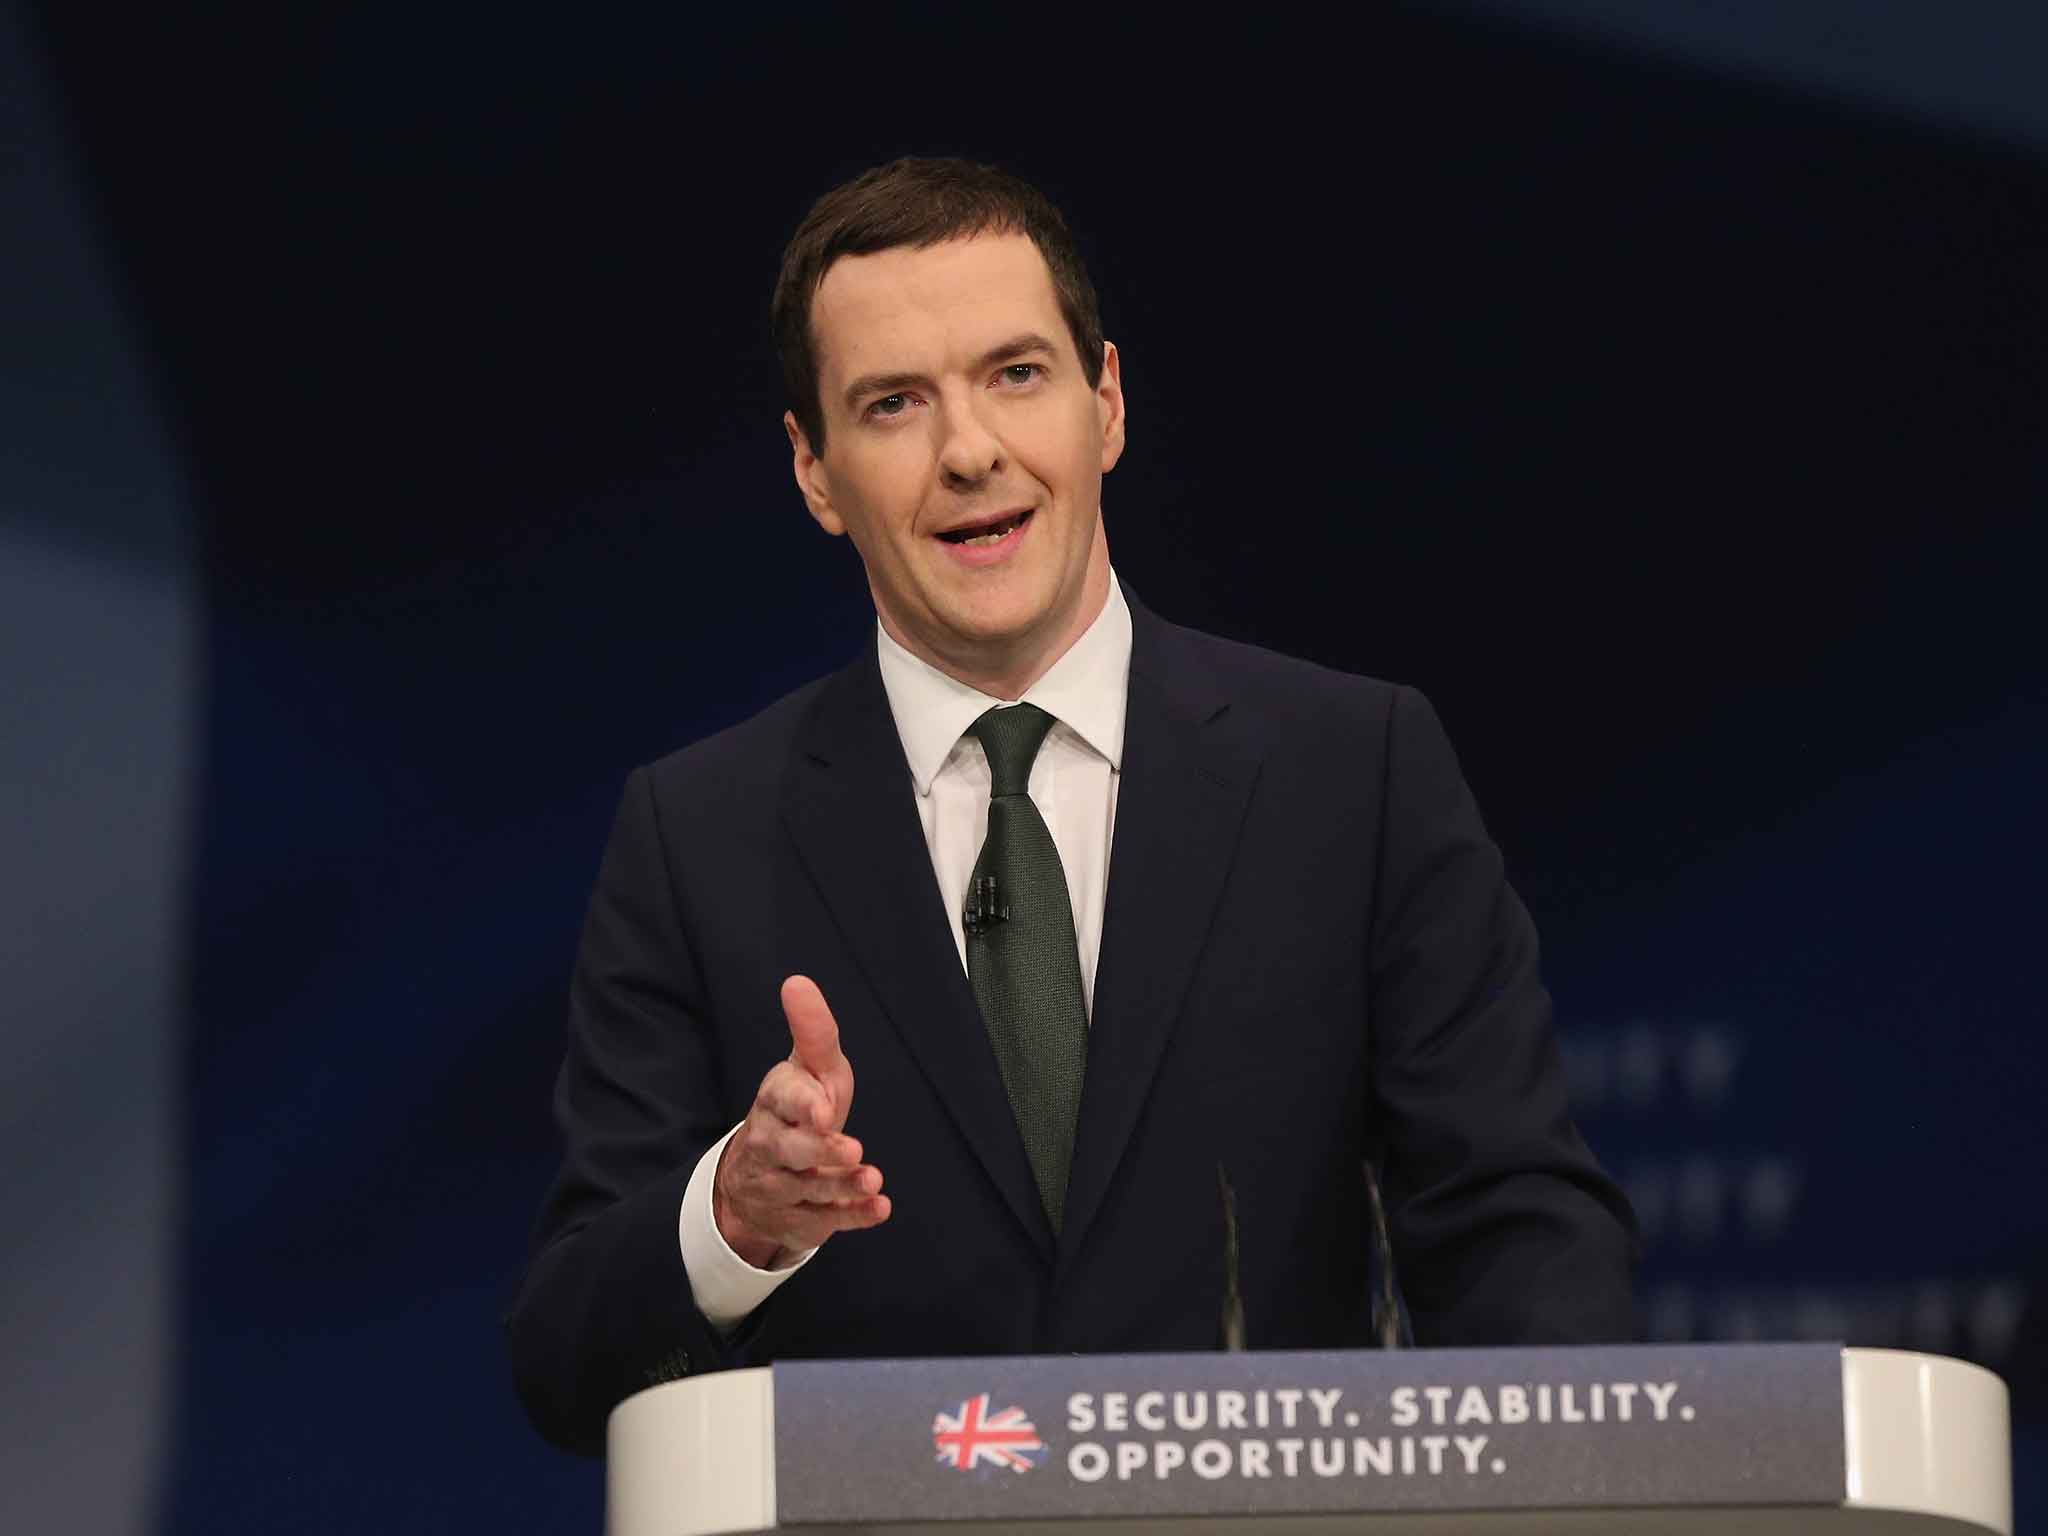 The reform was announced in the Chancellor's speech to the Conservative annual conference